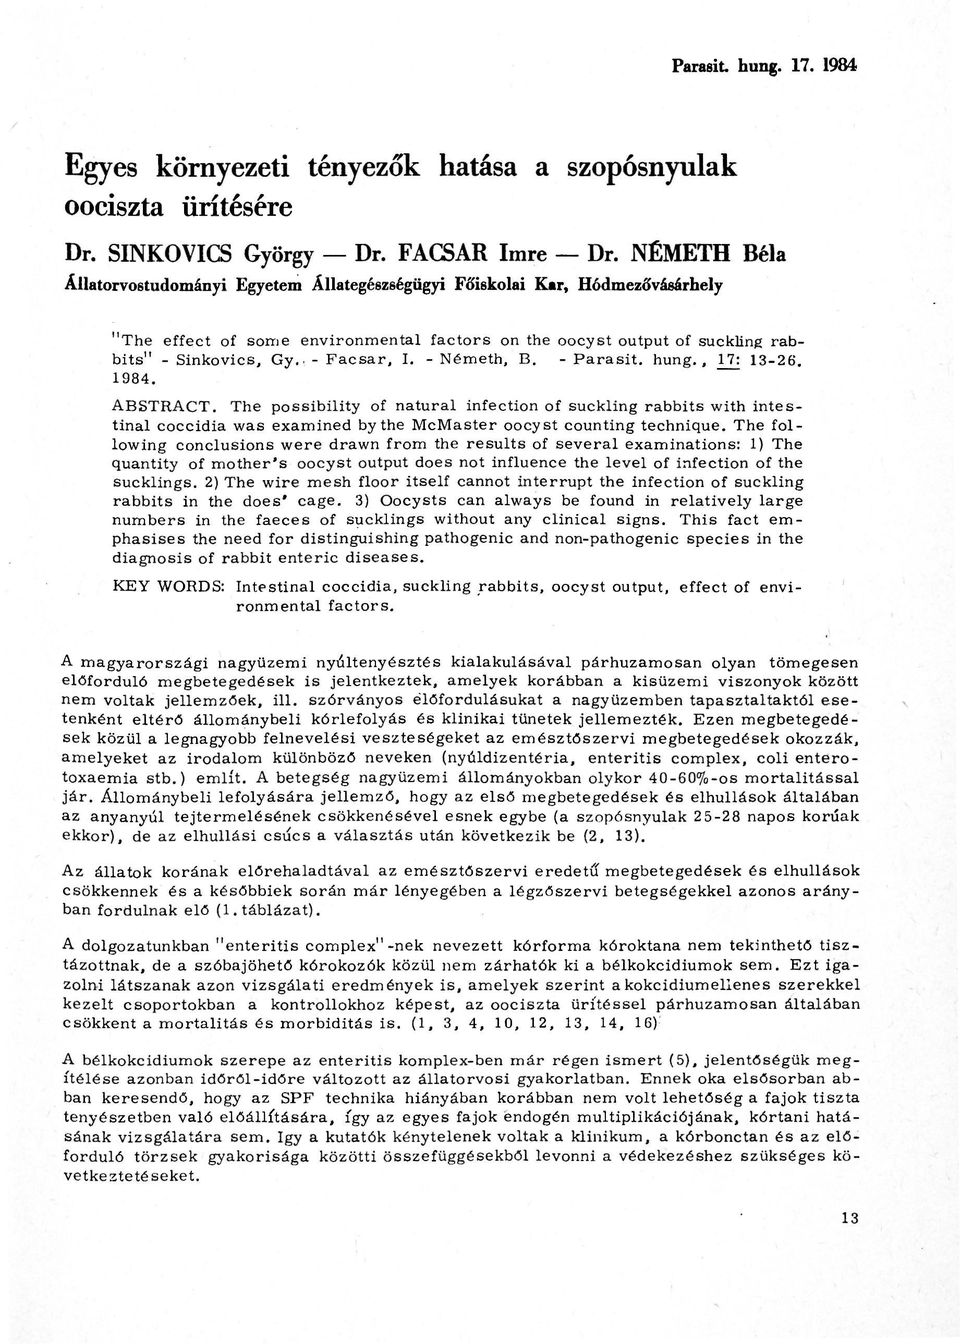 - Németh B. - Parasit. hung. 17: 13-6. 198. ABSTRACT. The possibility of natural infection of suckling rabbit s with intestinal coccidia was eamined by the McMaster oocyst counting technique.